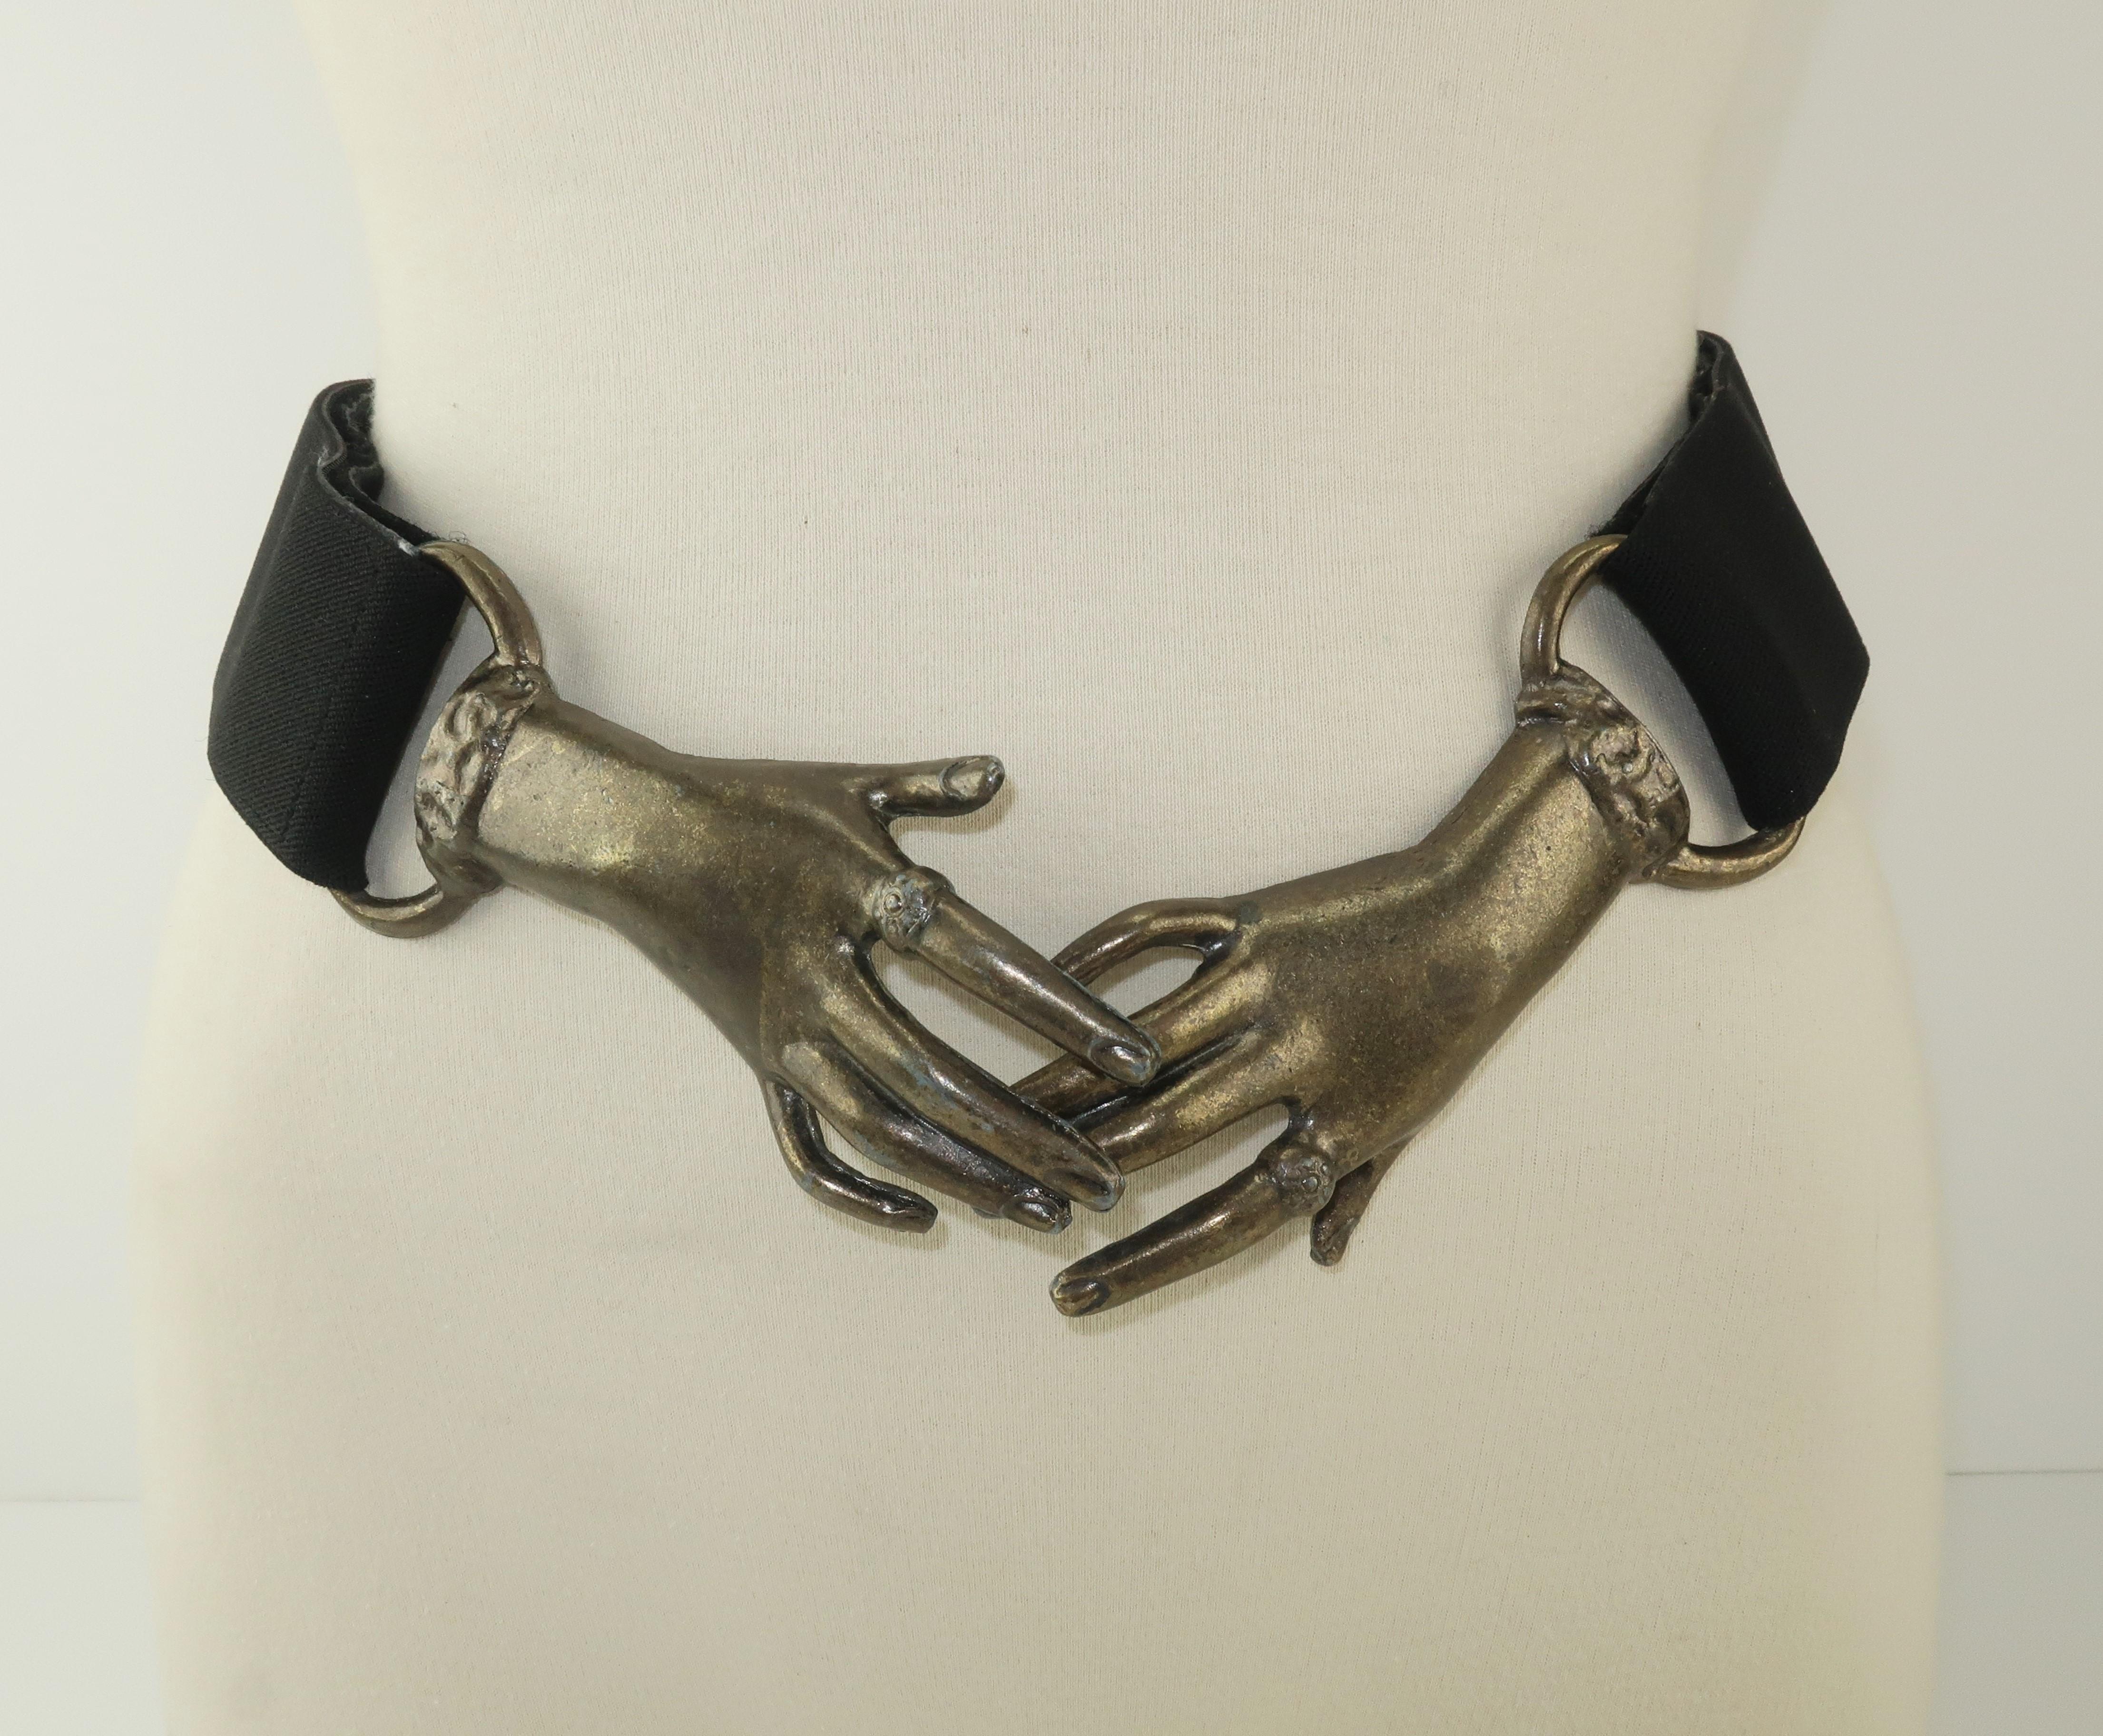 Extra hands have long been a favorite motif for fashion designers over the years including Elsa Schiaparelli.  This 1970s version depicts a pair of Victorian style clasping metal hands with an antiqued brass finish.  Each hand offers an open ended